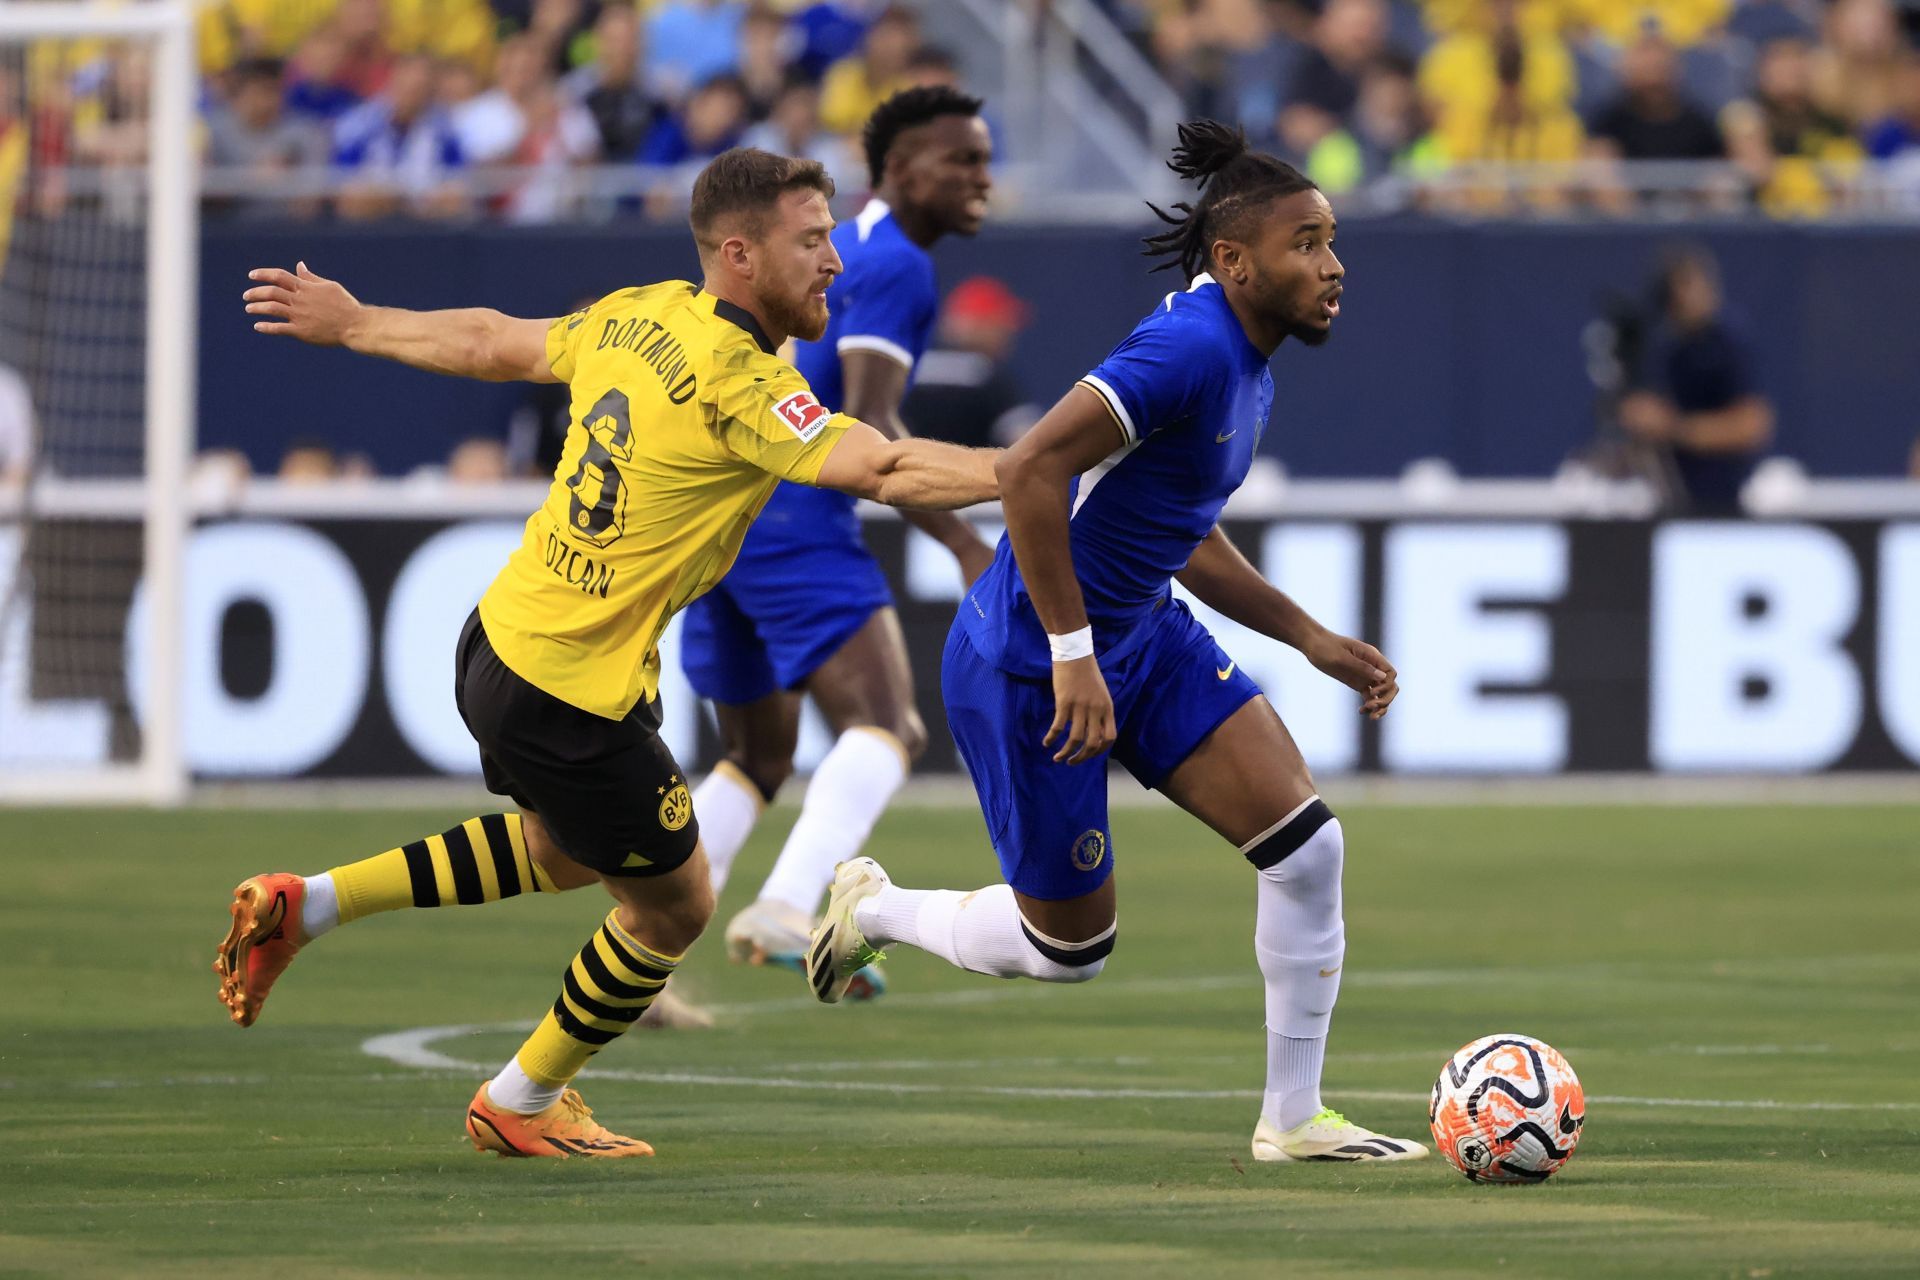 Nkunku picked up a knock early on against Dortmund.